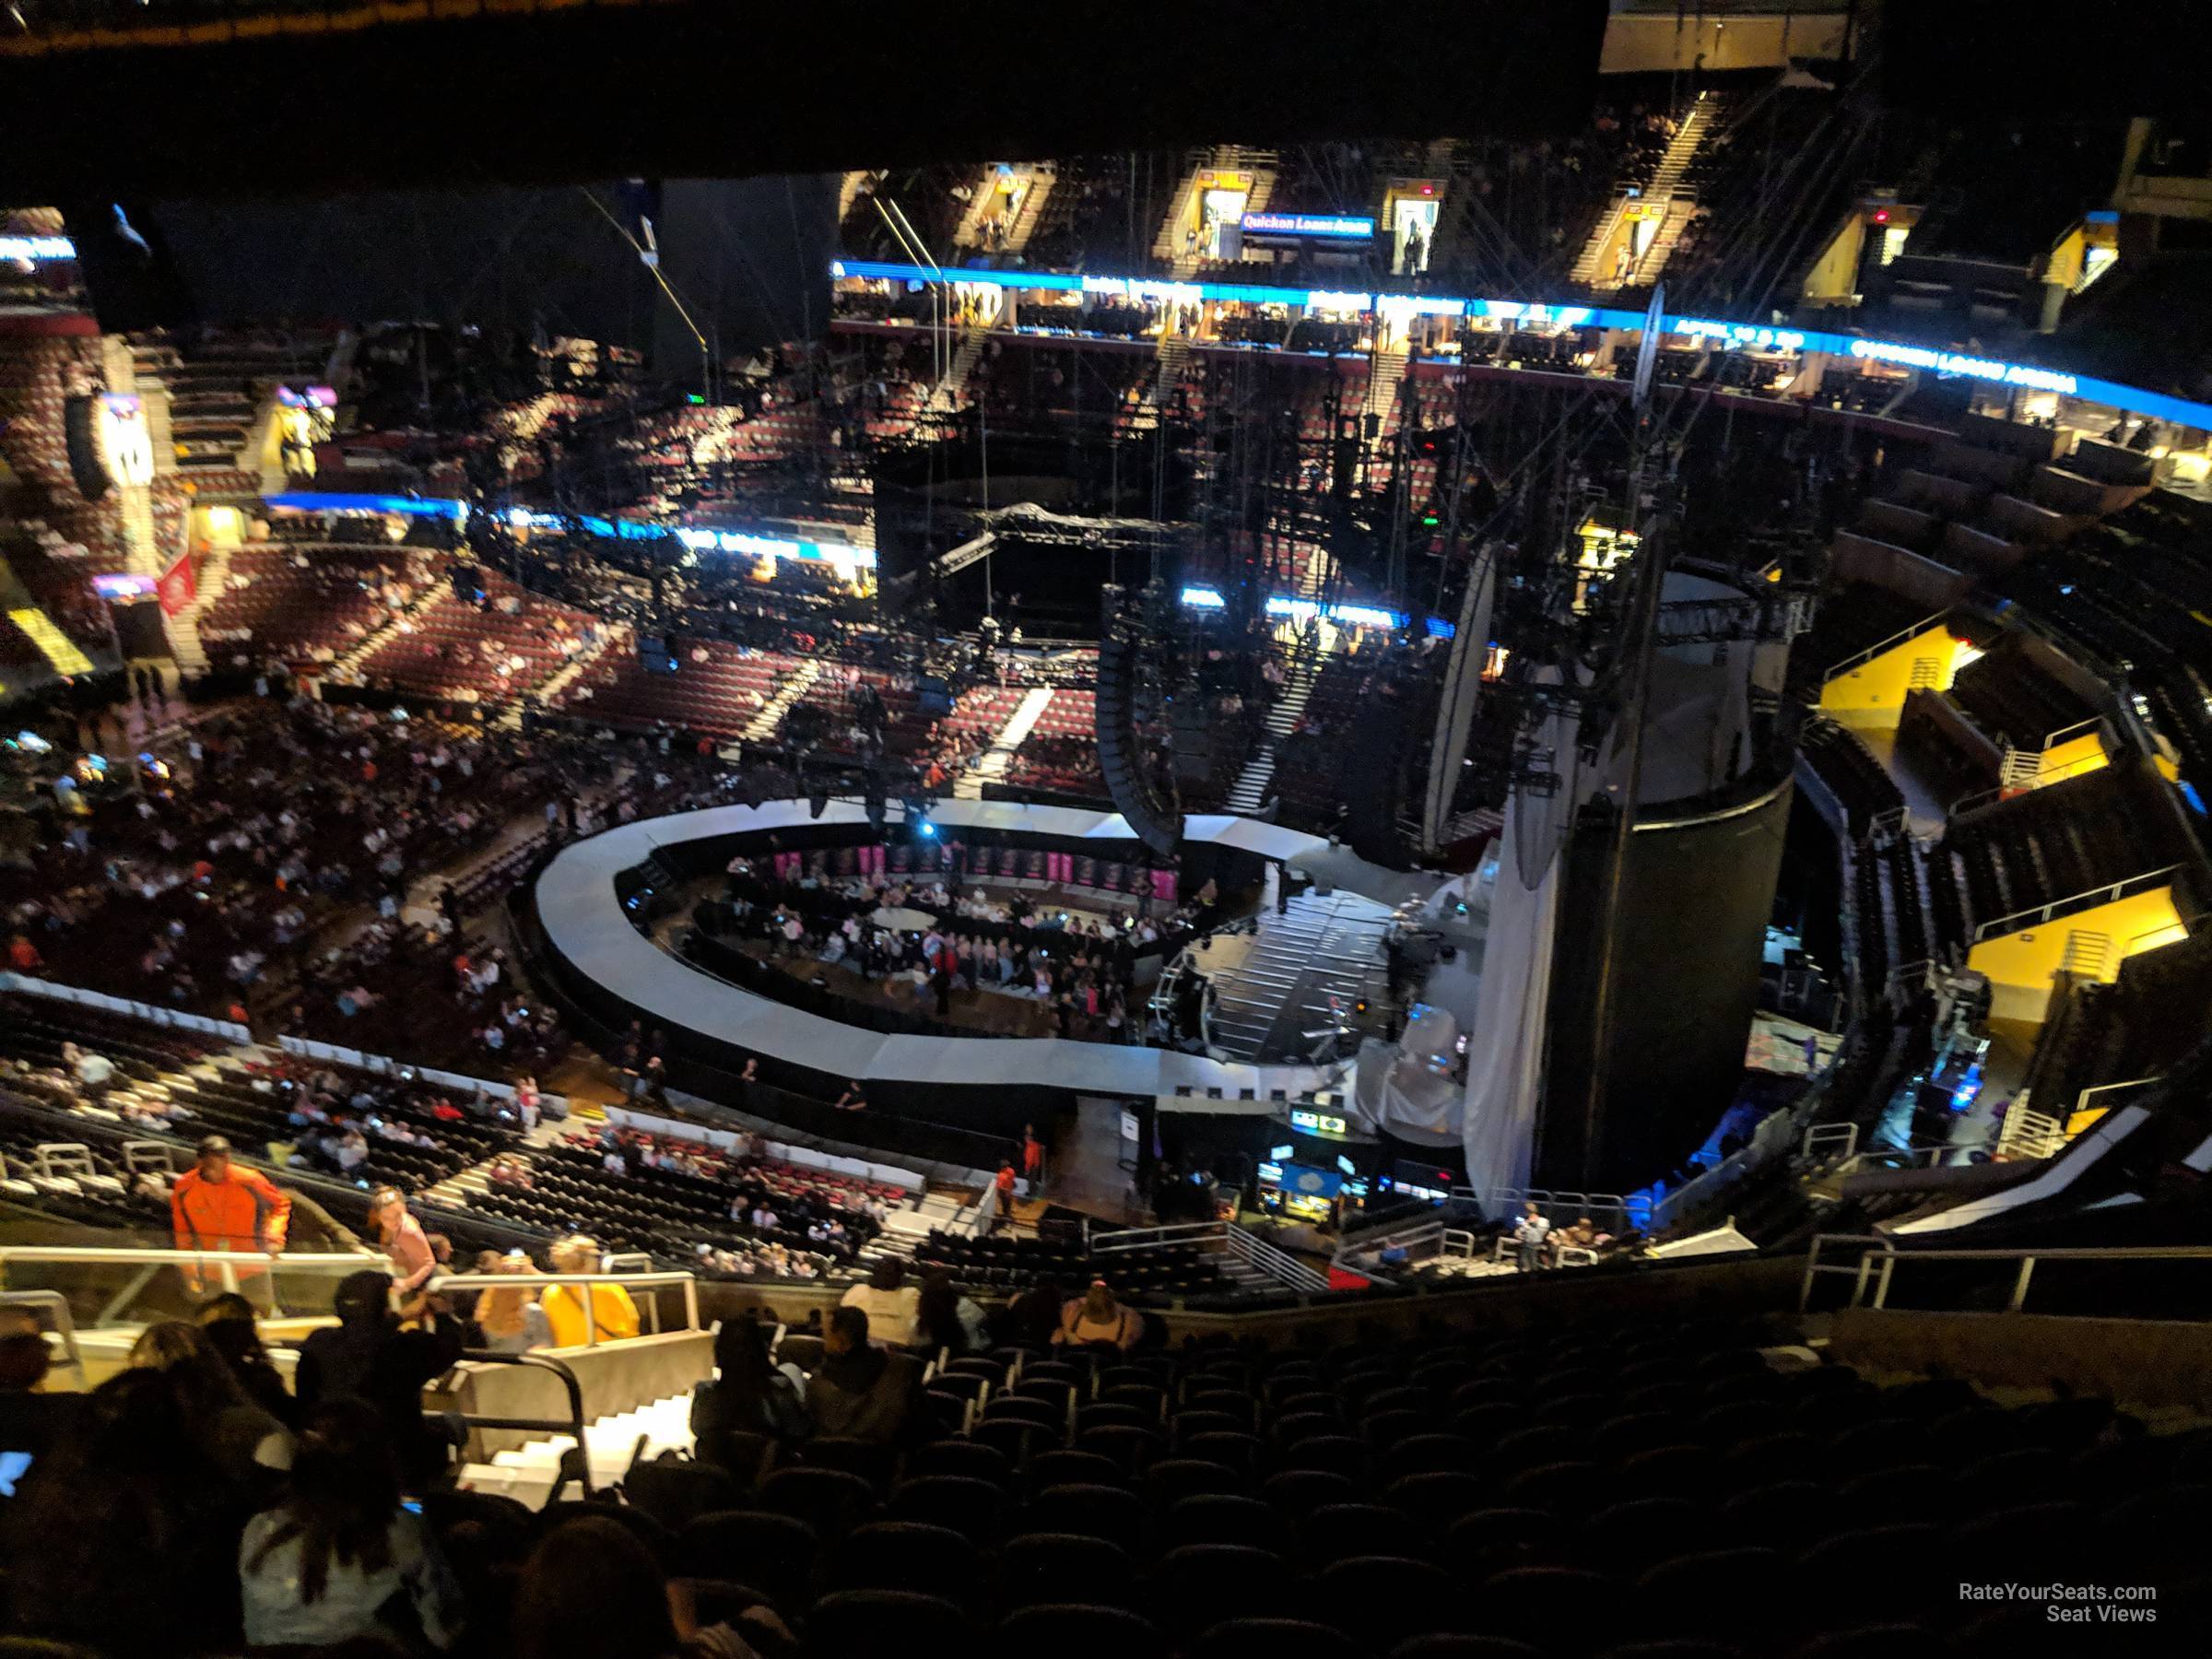 section 220, row 15 seat view  for concert - rocket mortgage fieldhouse